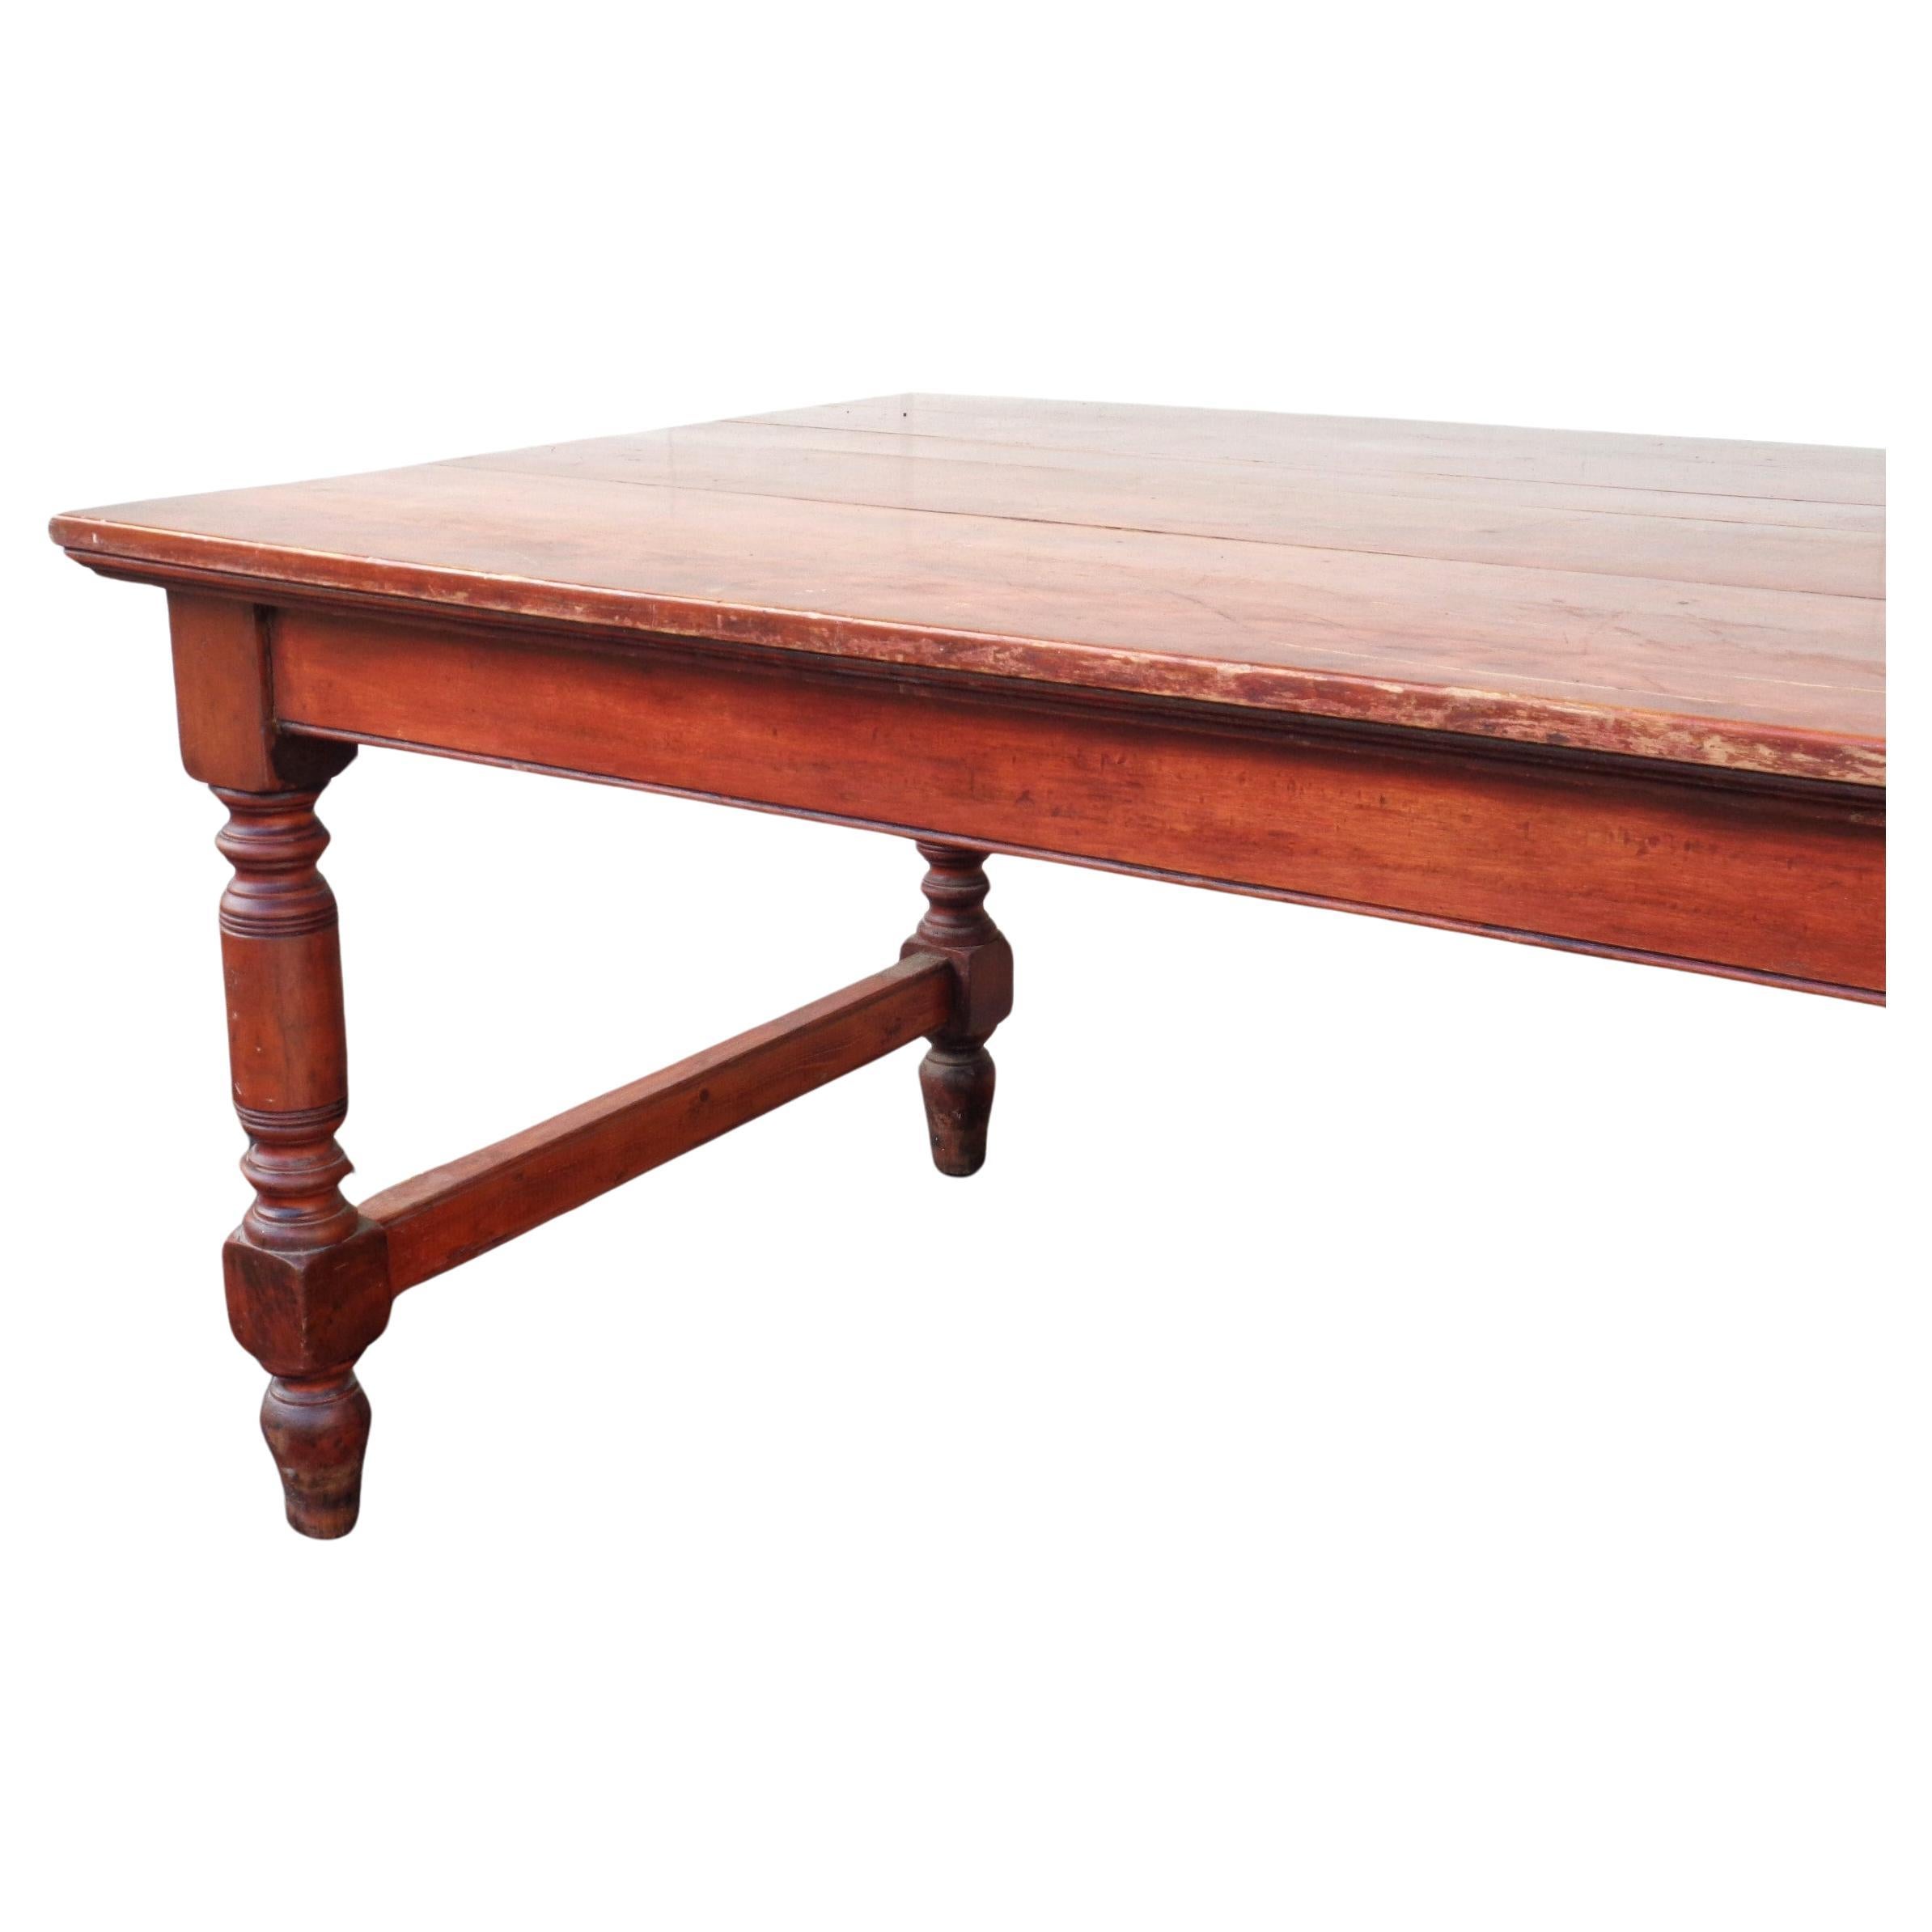 Antique American Banquet Dining Table, 1870-1880 In Good Condition For Sale In Rochester, NY